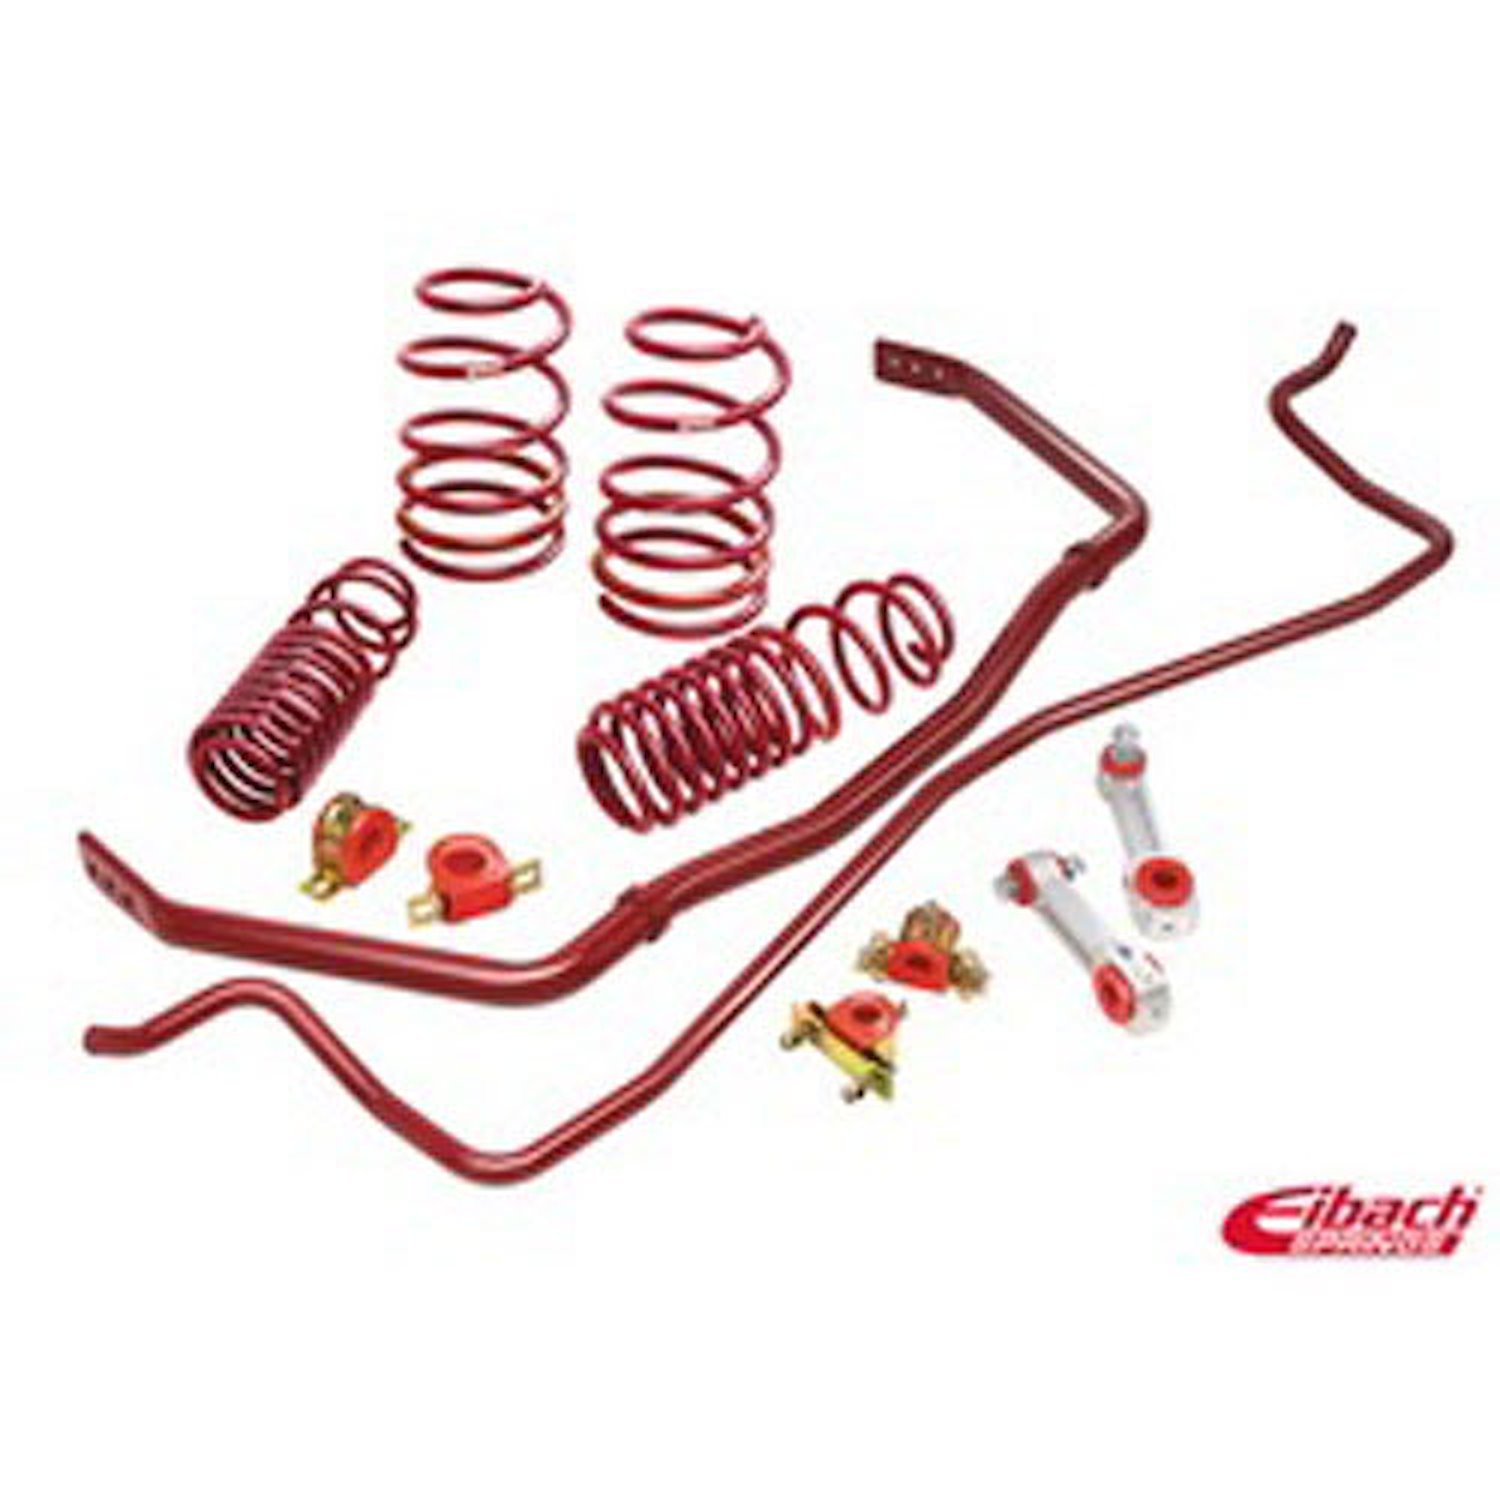 4.12935.880 Sport-Plus Suspension System 2011-14 Mustang Convertible - 1.4" Front/1.5" Rear Drop